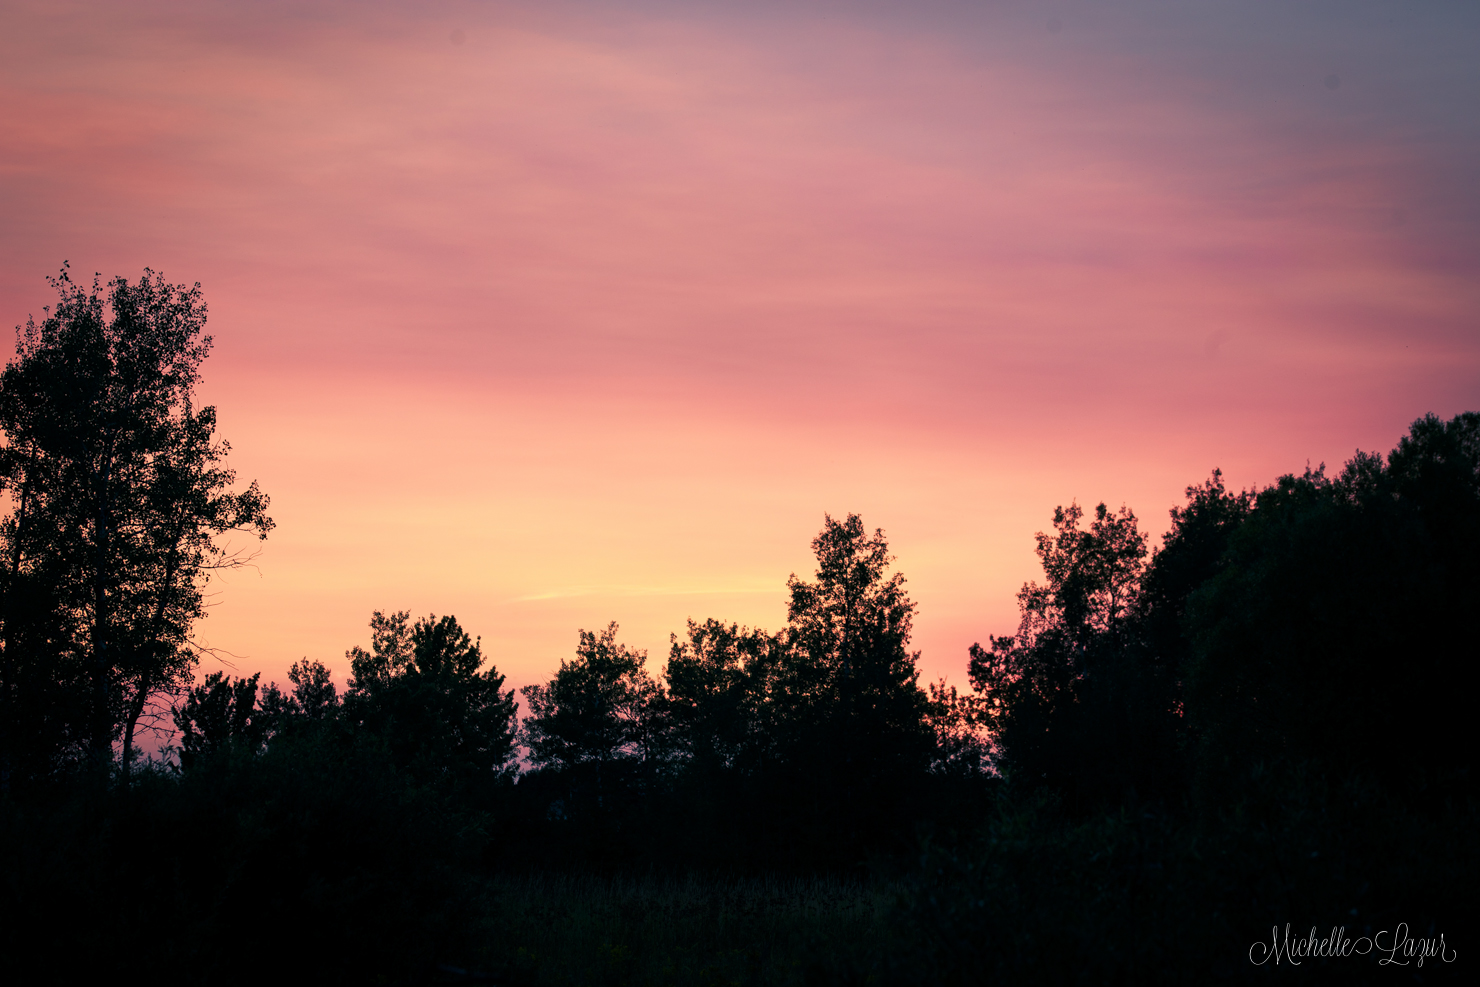 Sunset on the eve of the 2015 Ruffed Grouse Opener! 20150826-_MG_0833